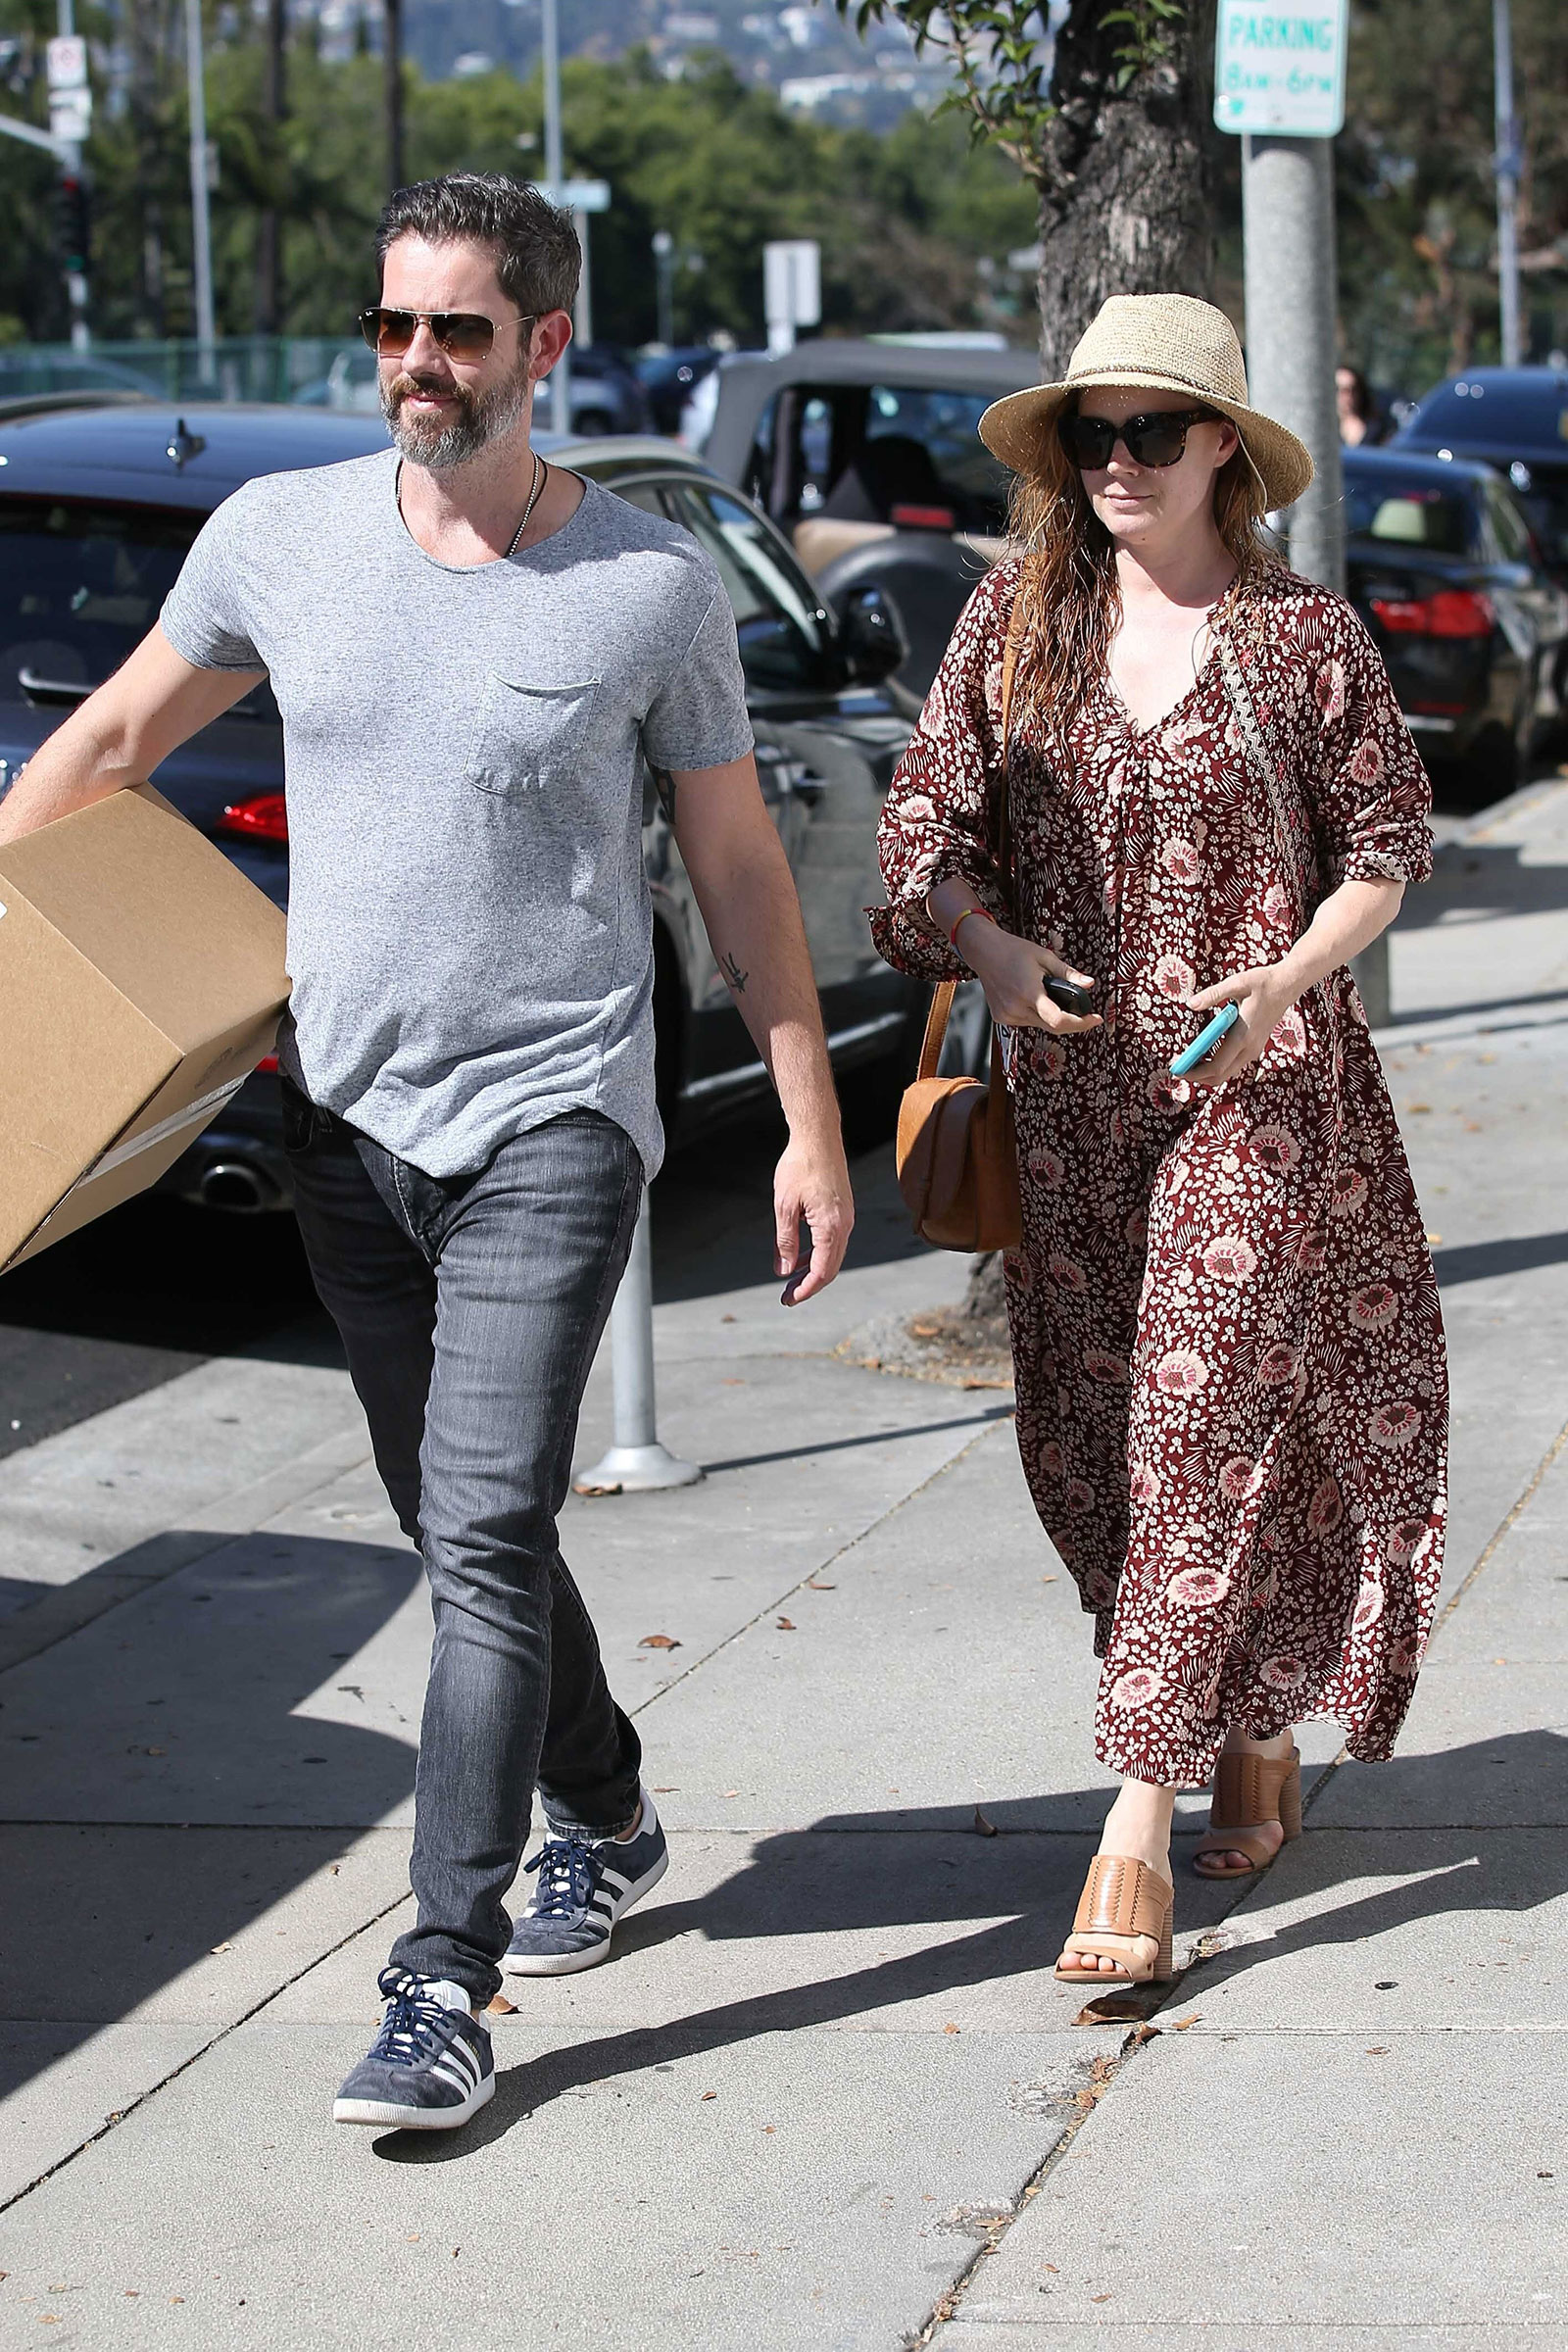 Amy Adams looks summery in a maxi dress and huarache slide sandals.